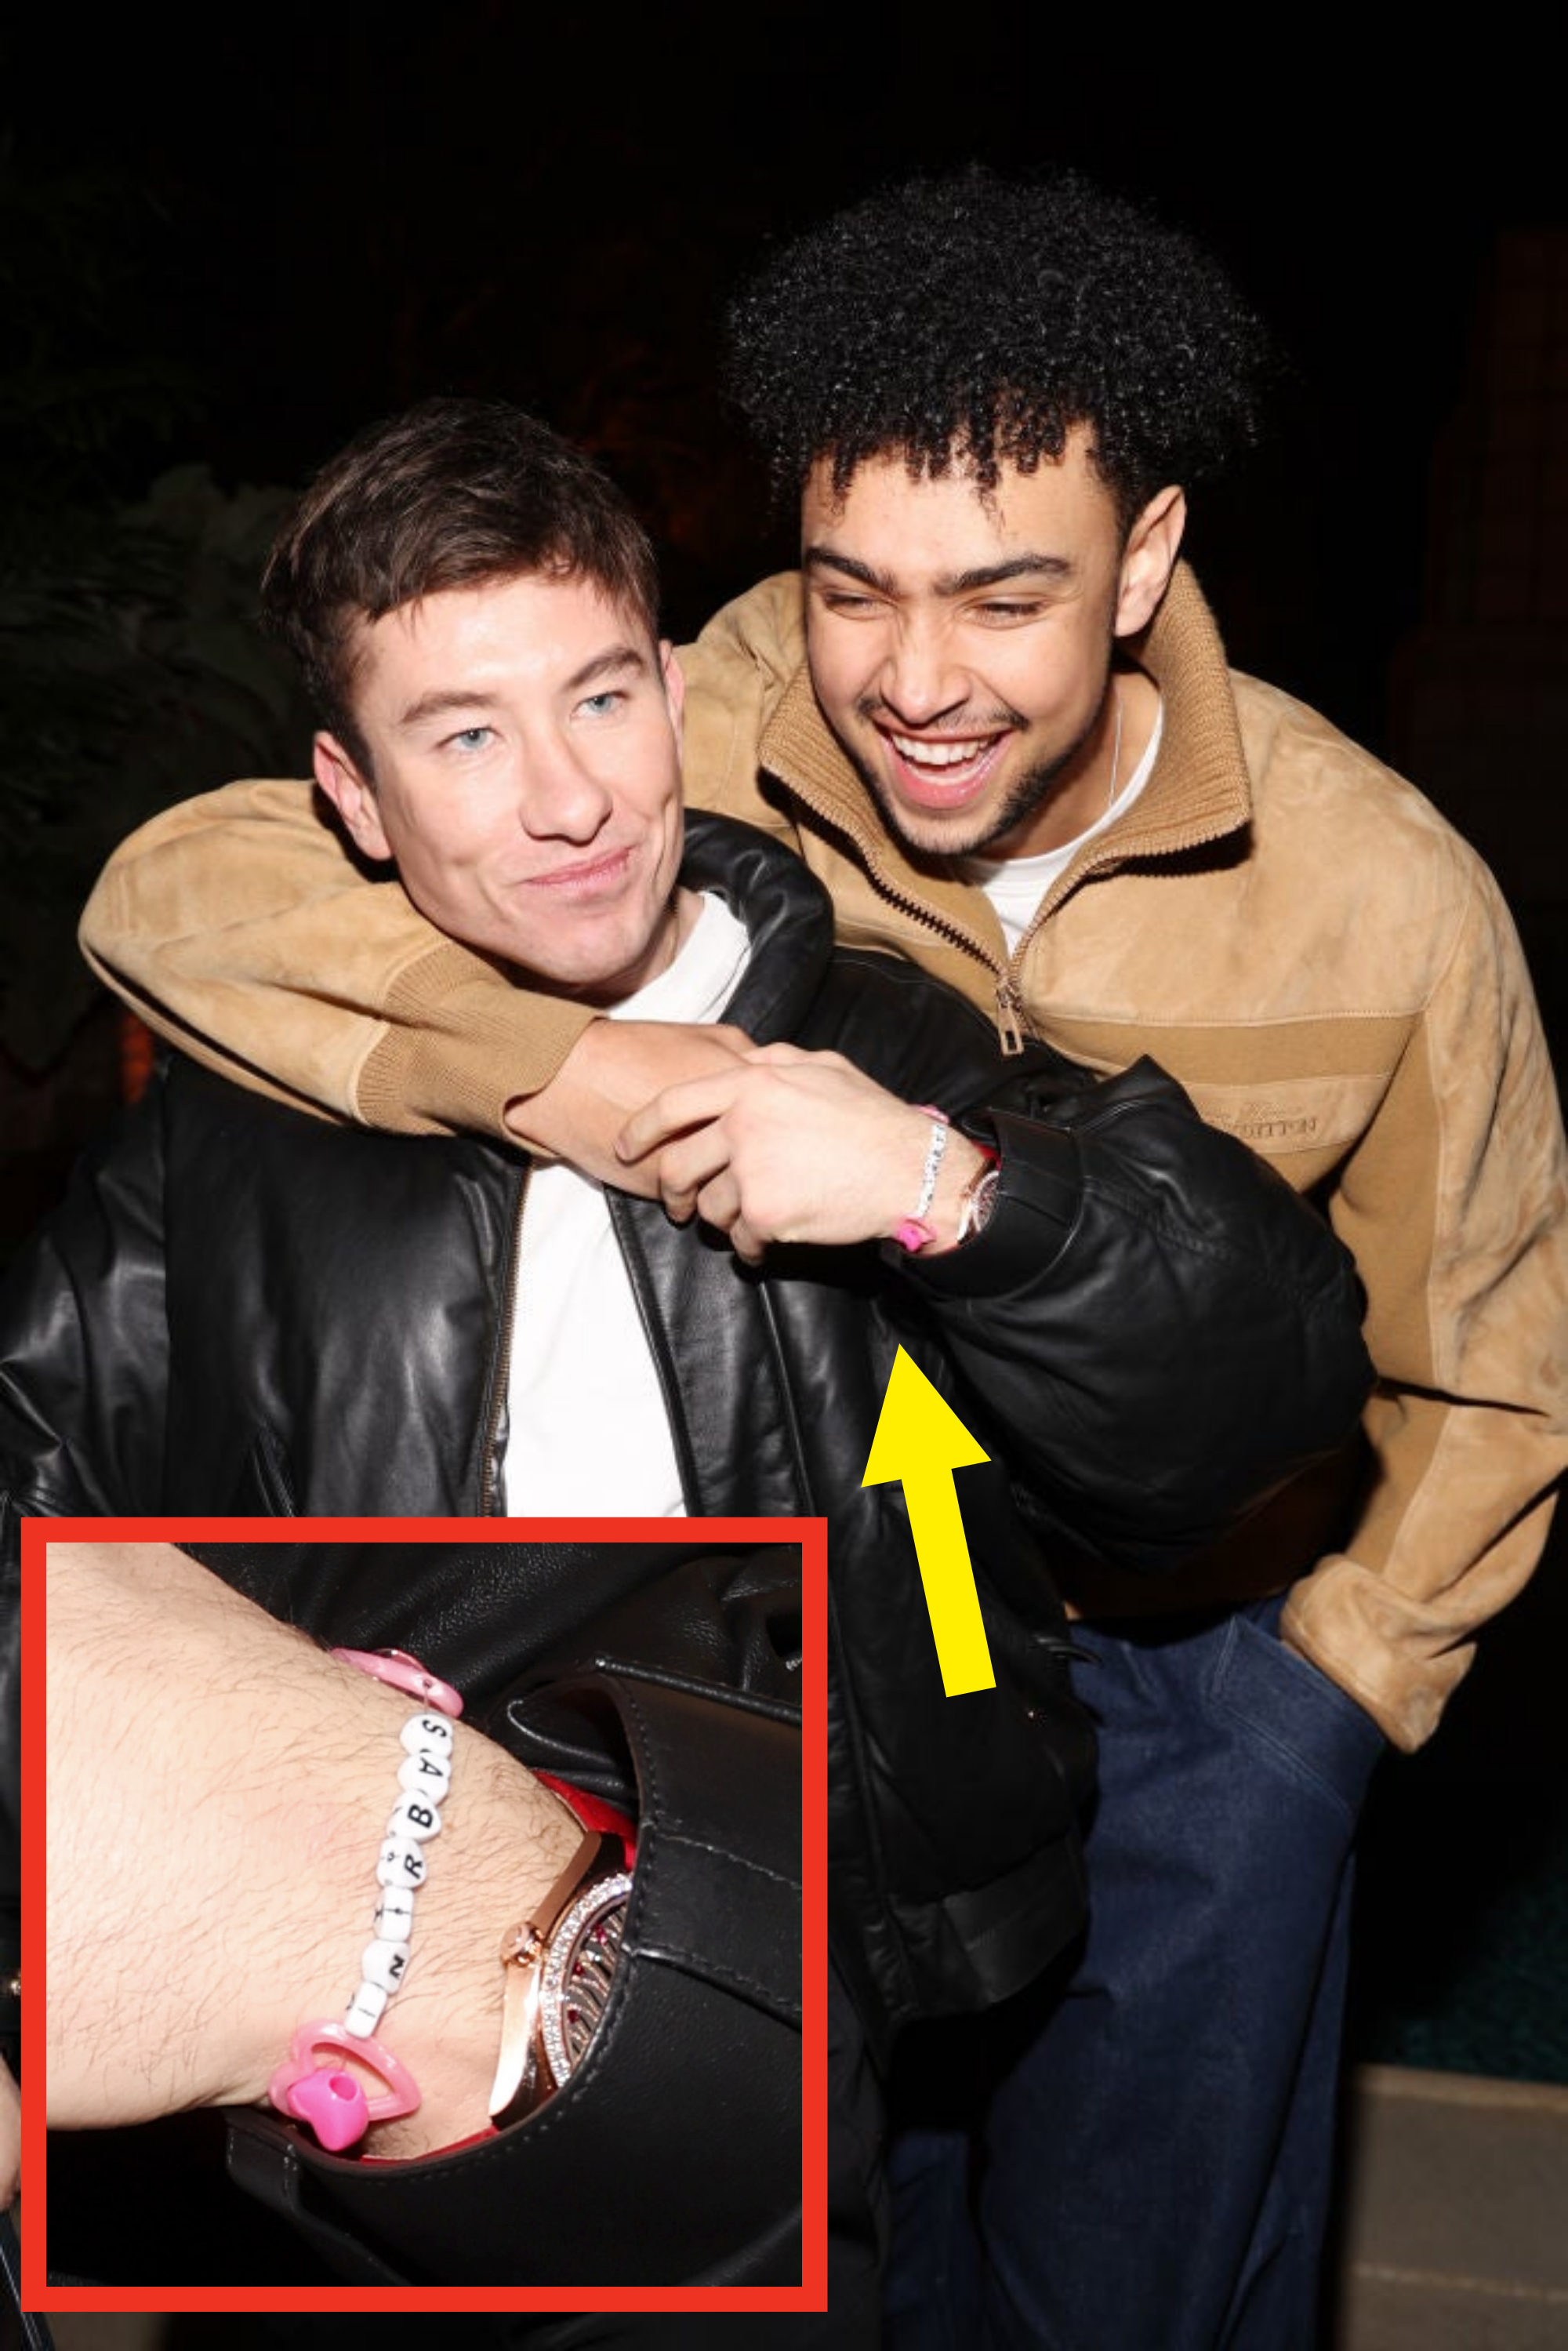 The two men smiling and embracing, the bracelet shown on barry&#x27;s wrist